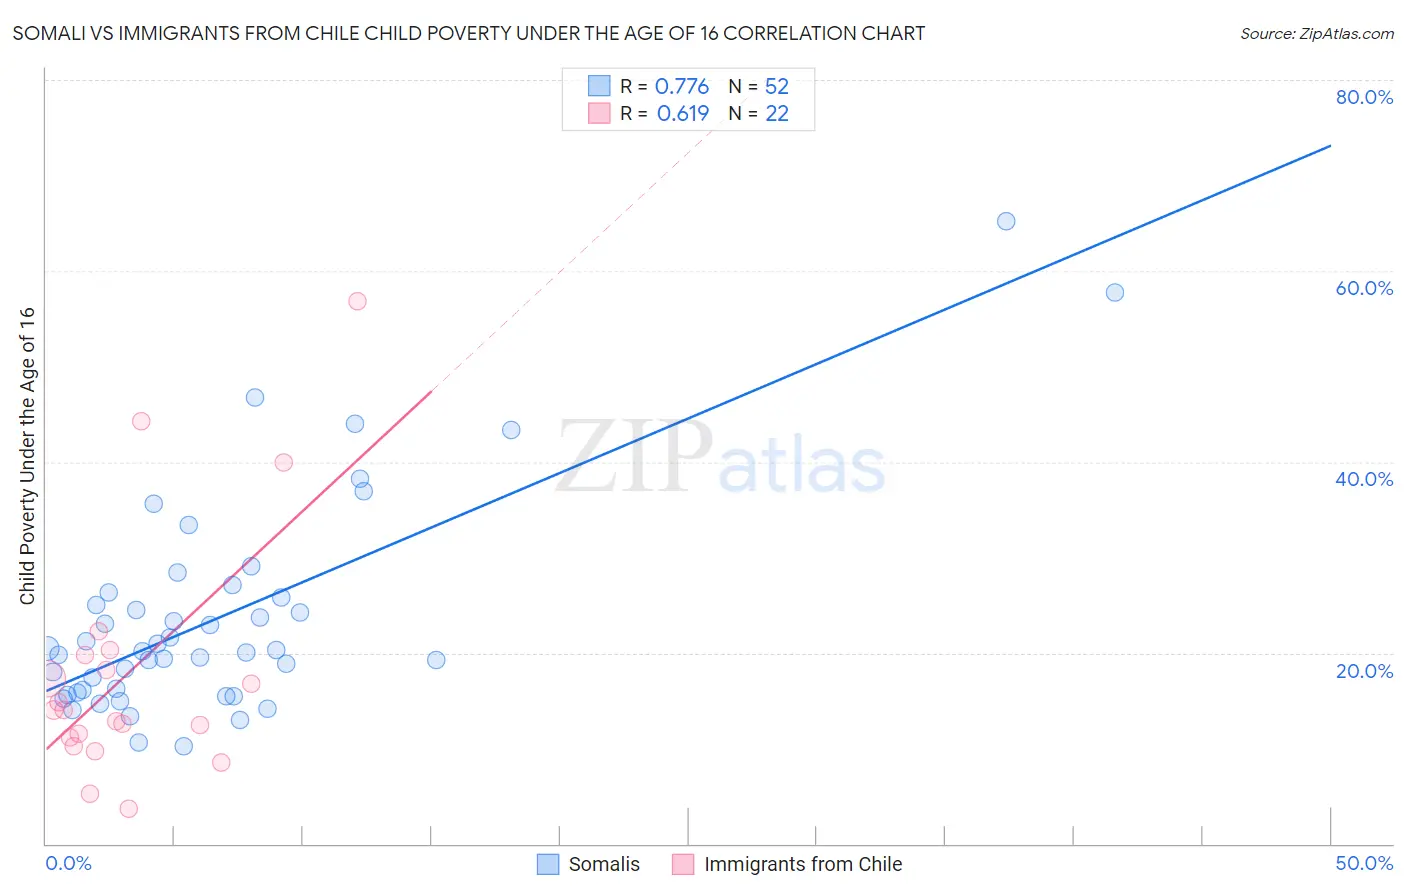 Somali vs Immigrants from Chile Child Poverty Under the Age of 16